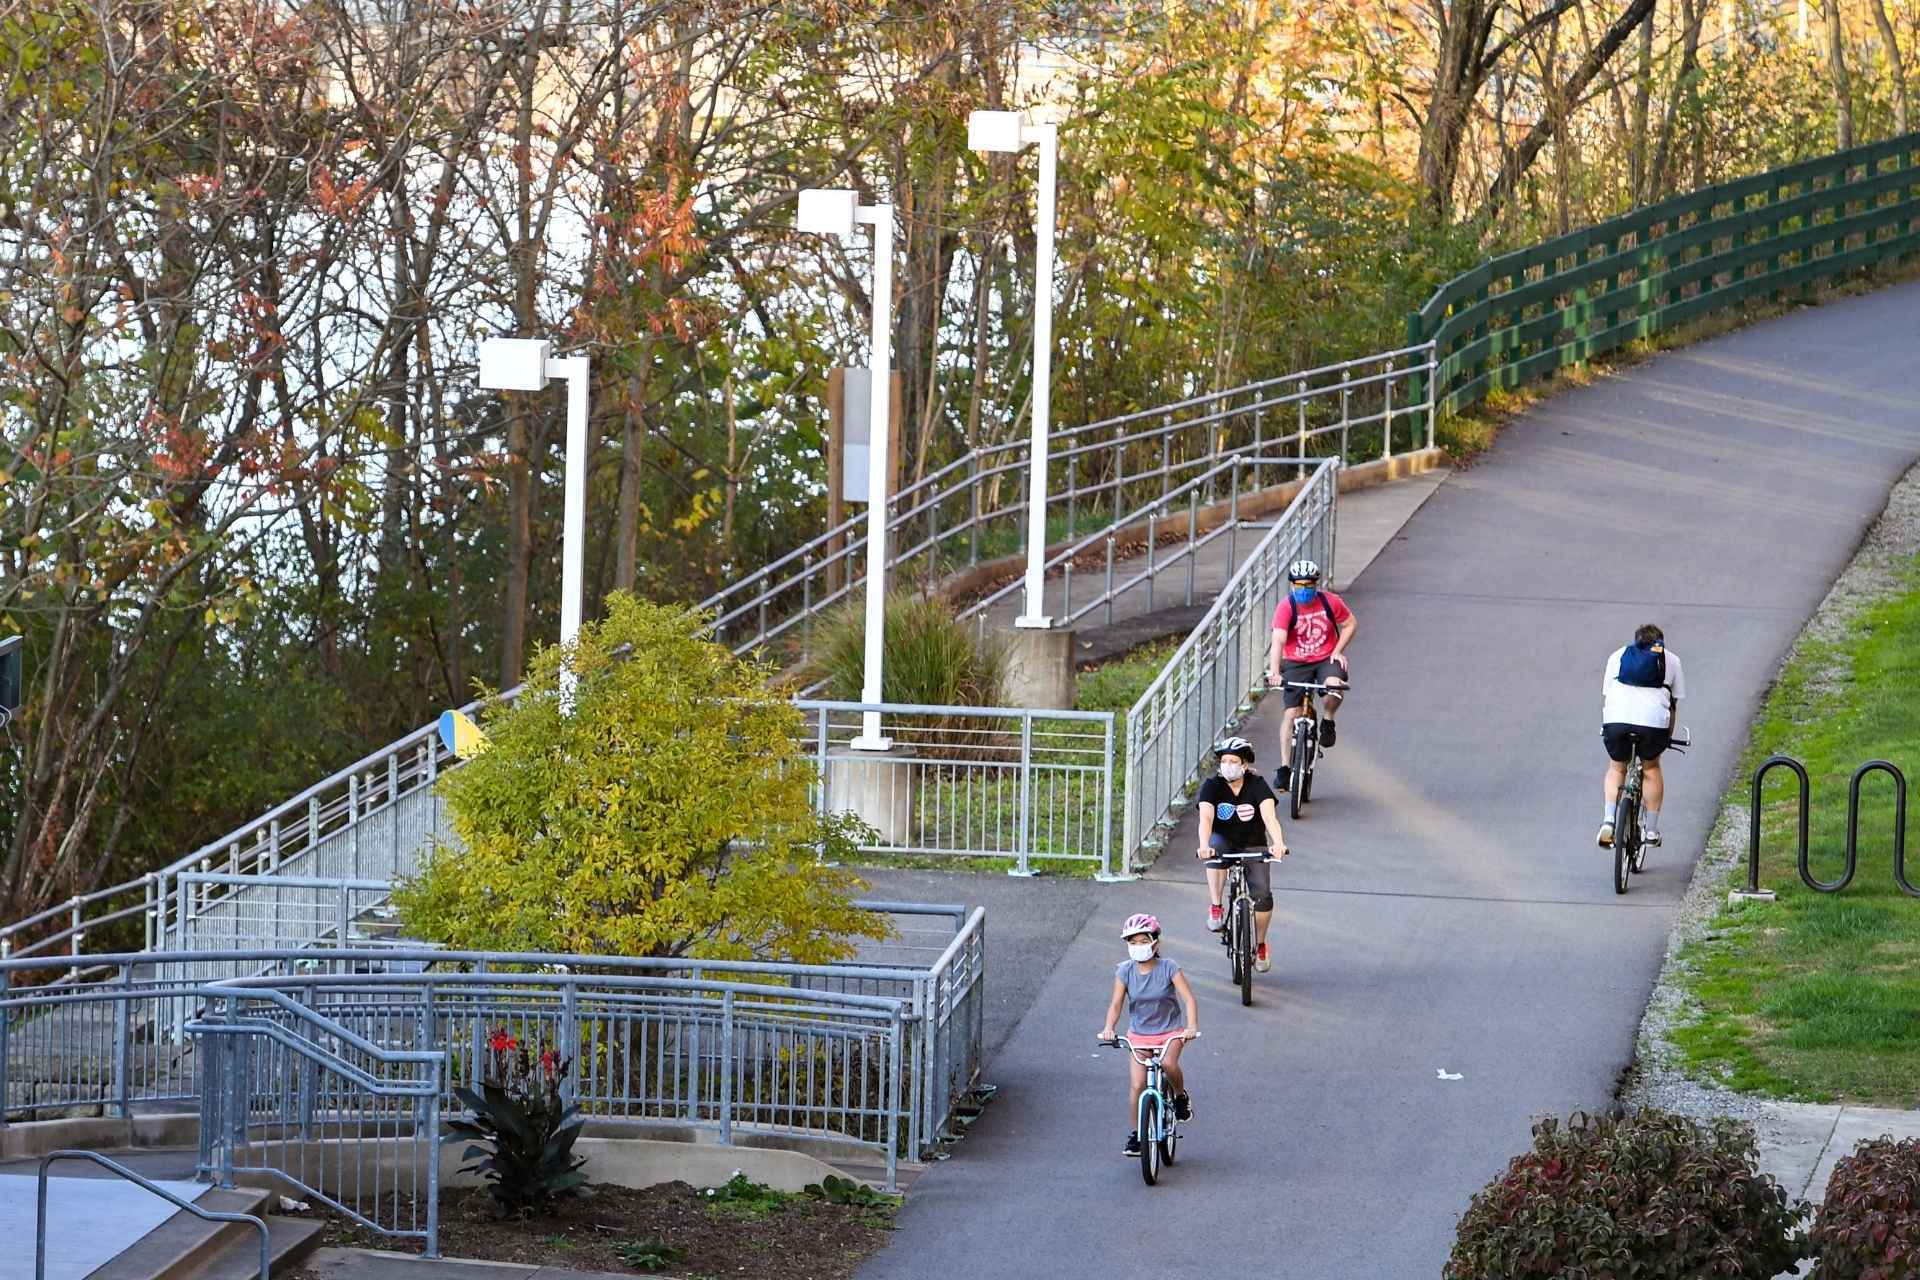 Cyclists take in some fresh air and exercise on the Rail Trail in Morgantown. (WVU Photo/Jennifer Shephard)